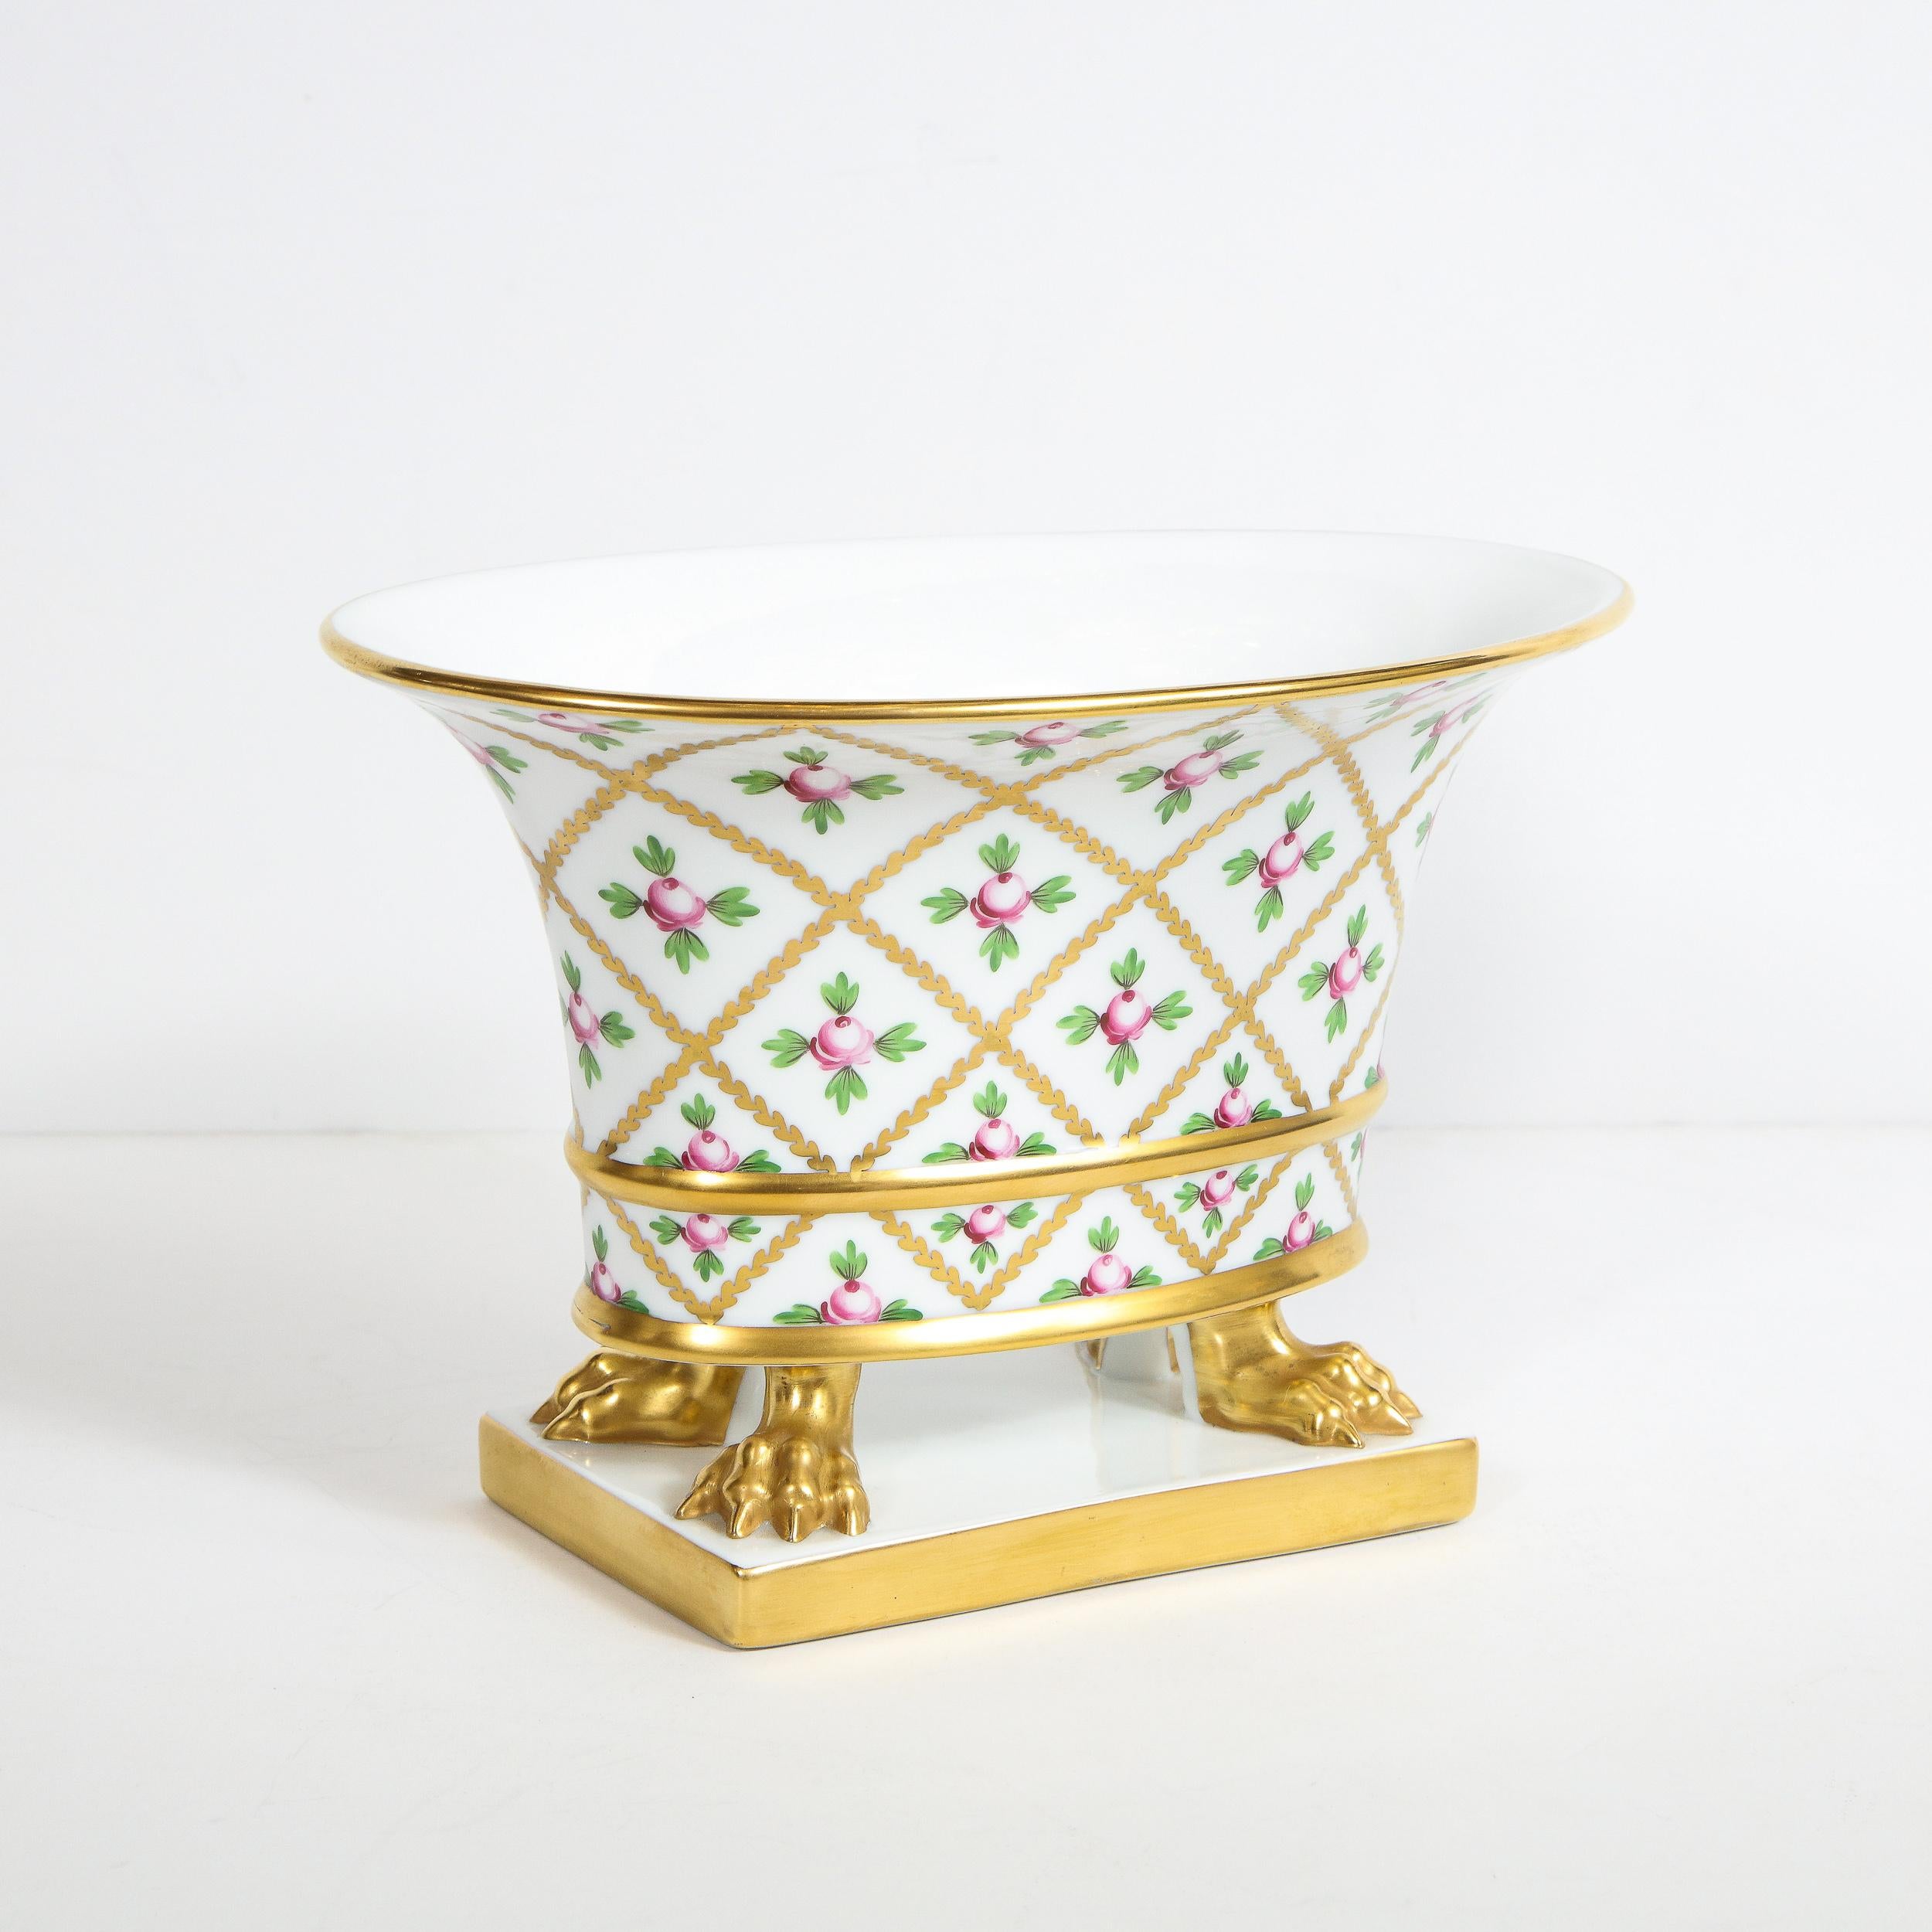 Hand-Painted Neoclassical Porcelain Cachepot w/ Clawfeet & 24kt Gold Detailing Signed Herend